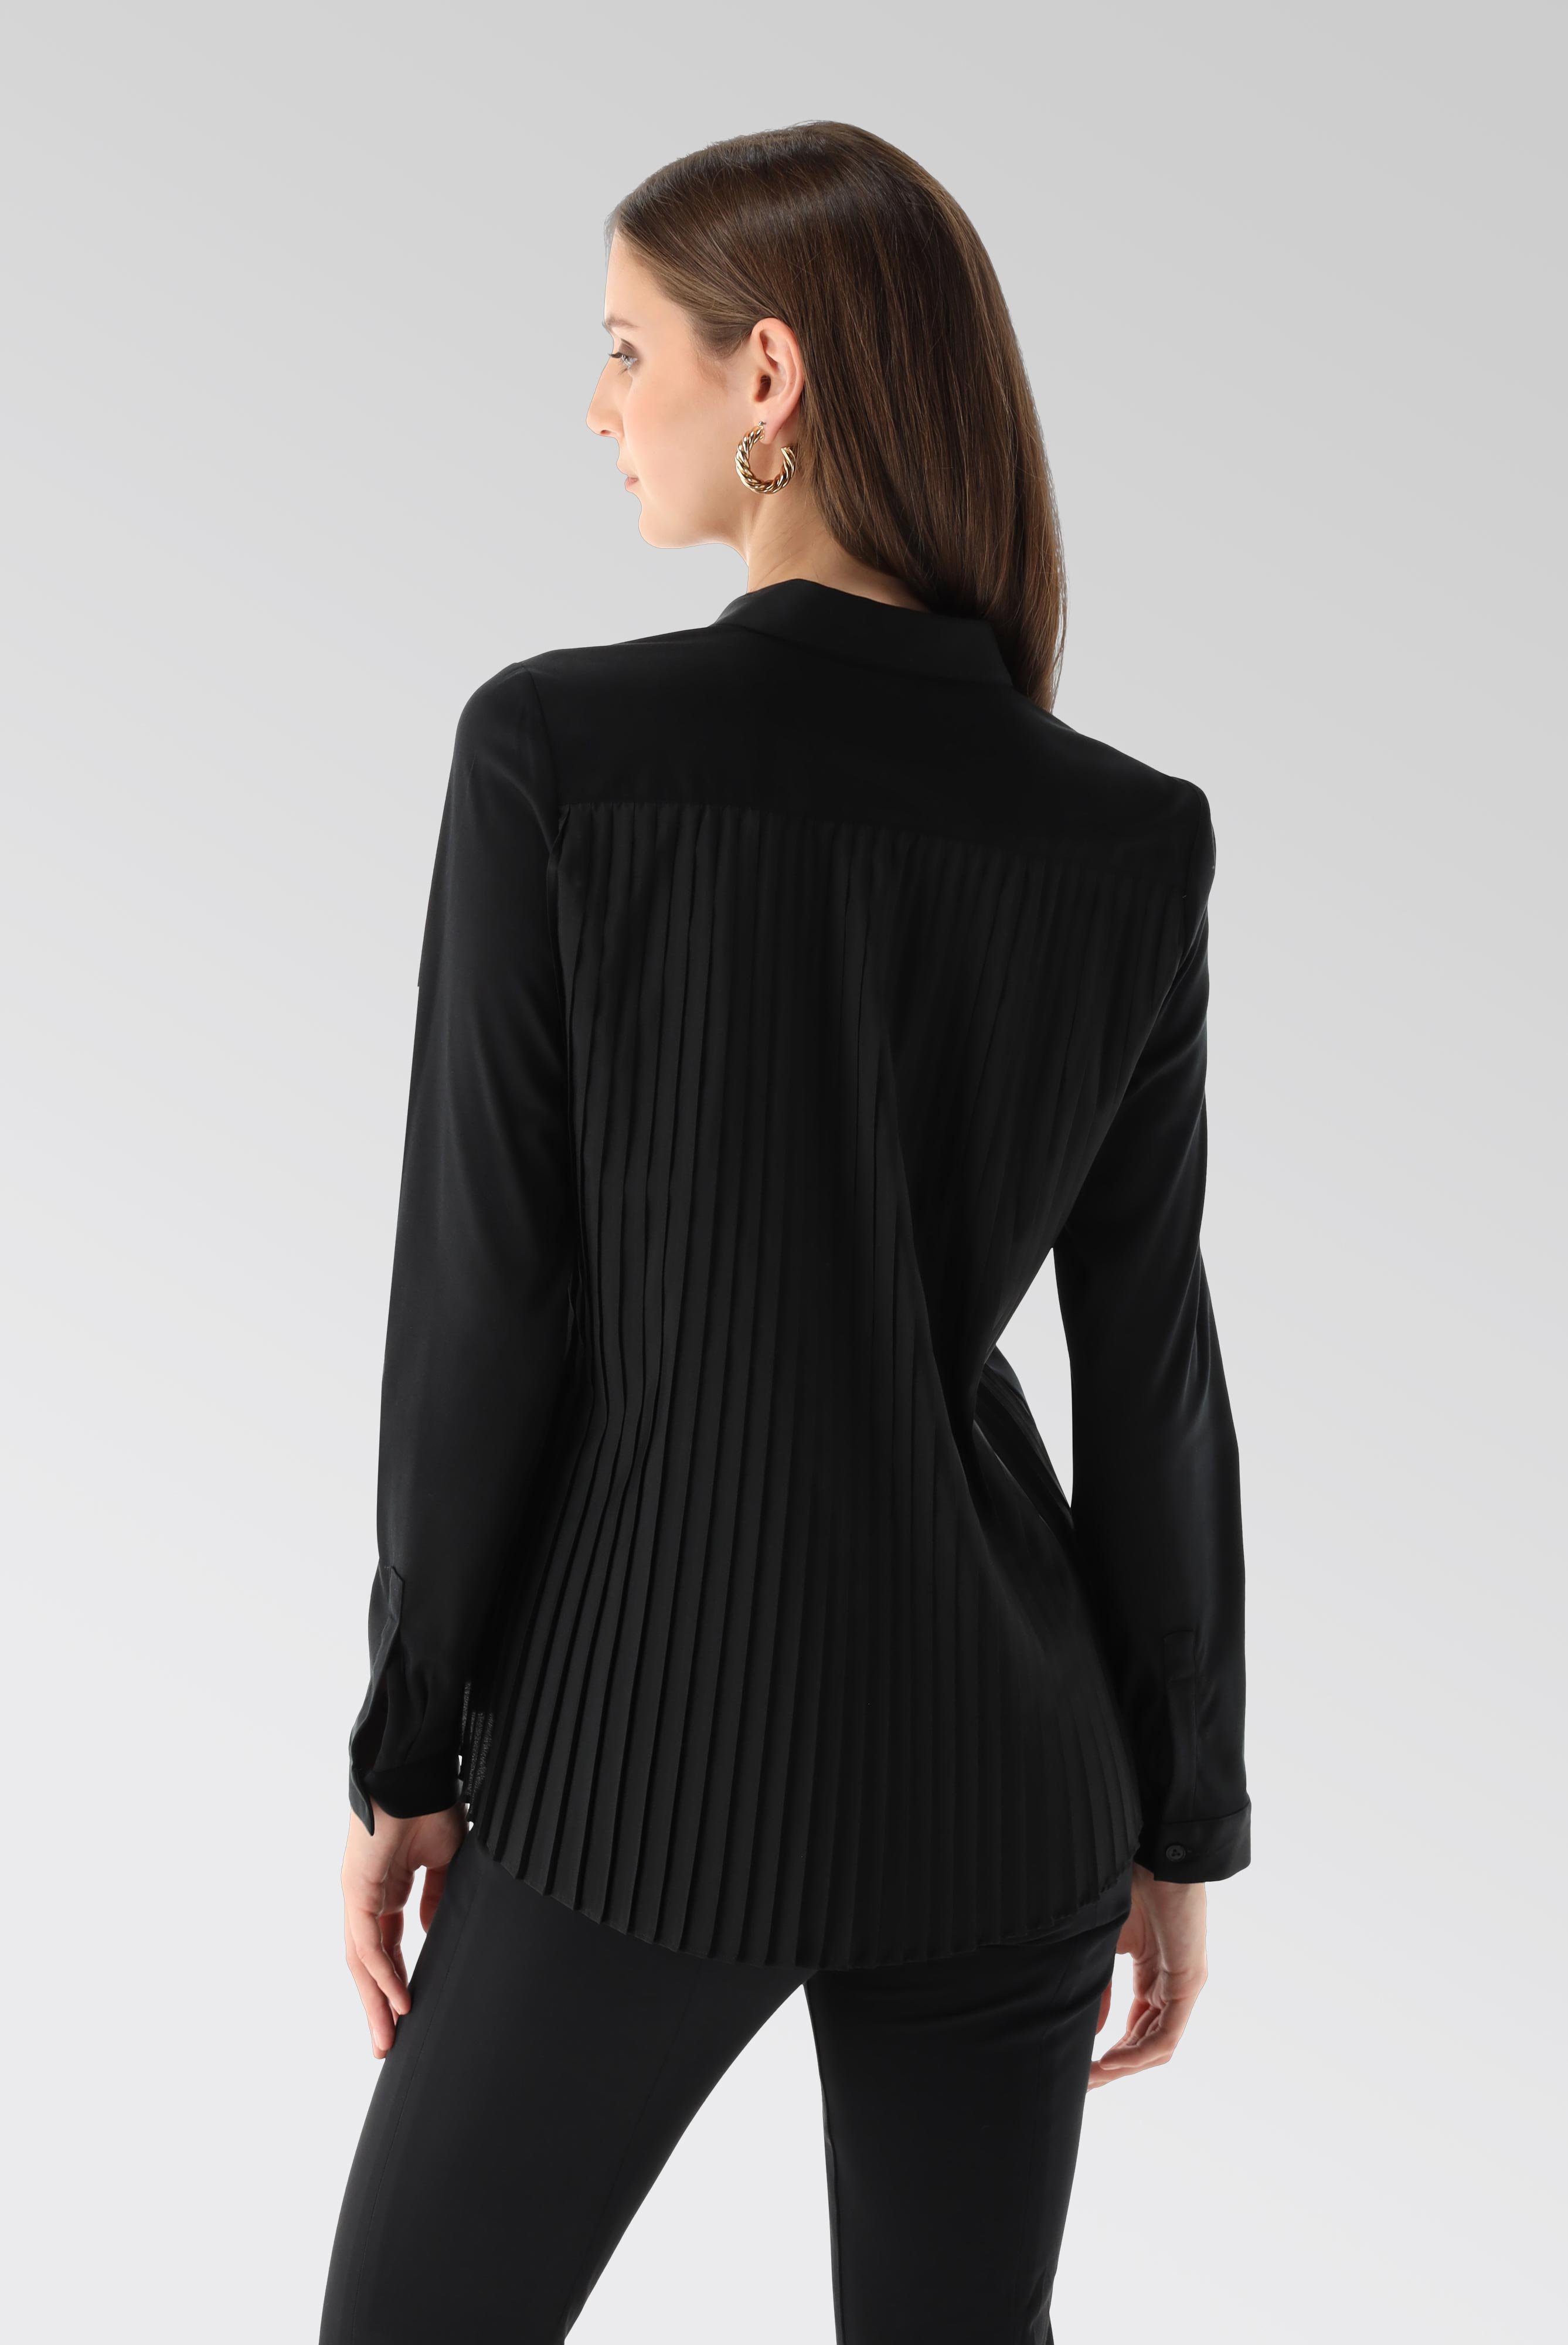 Jersey Blouses+Swiss Cotton Blouse with Pleated Back+05.6703.18.180031.099.32